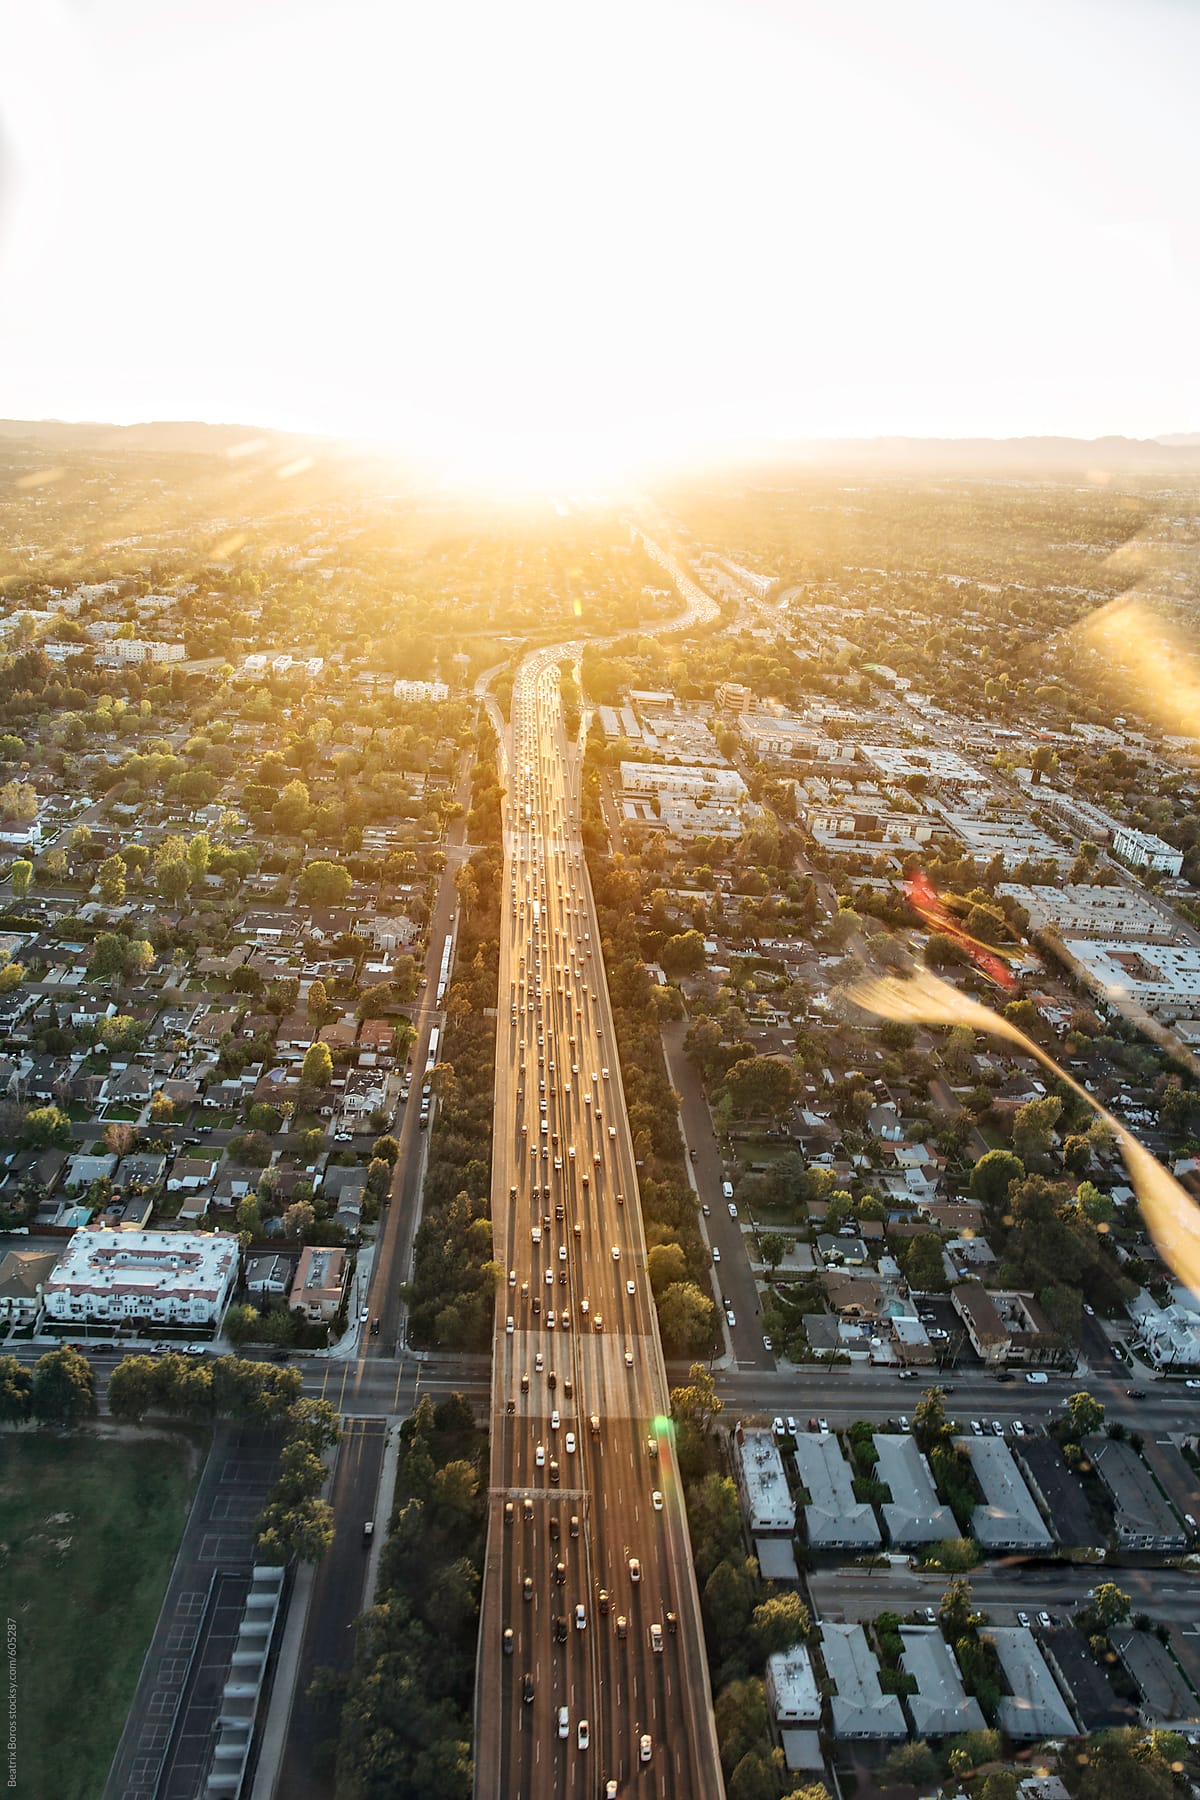 Freeway with a lot of traffic illuminated by the Sunset